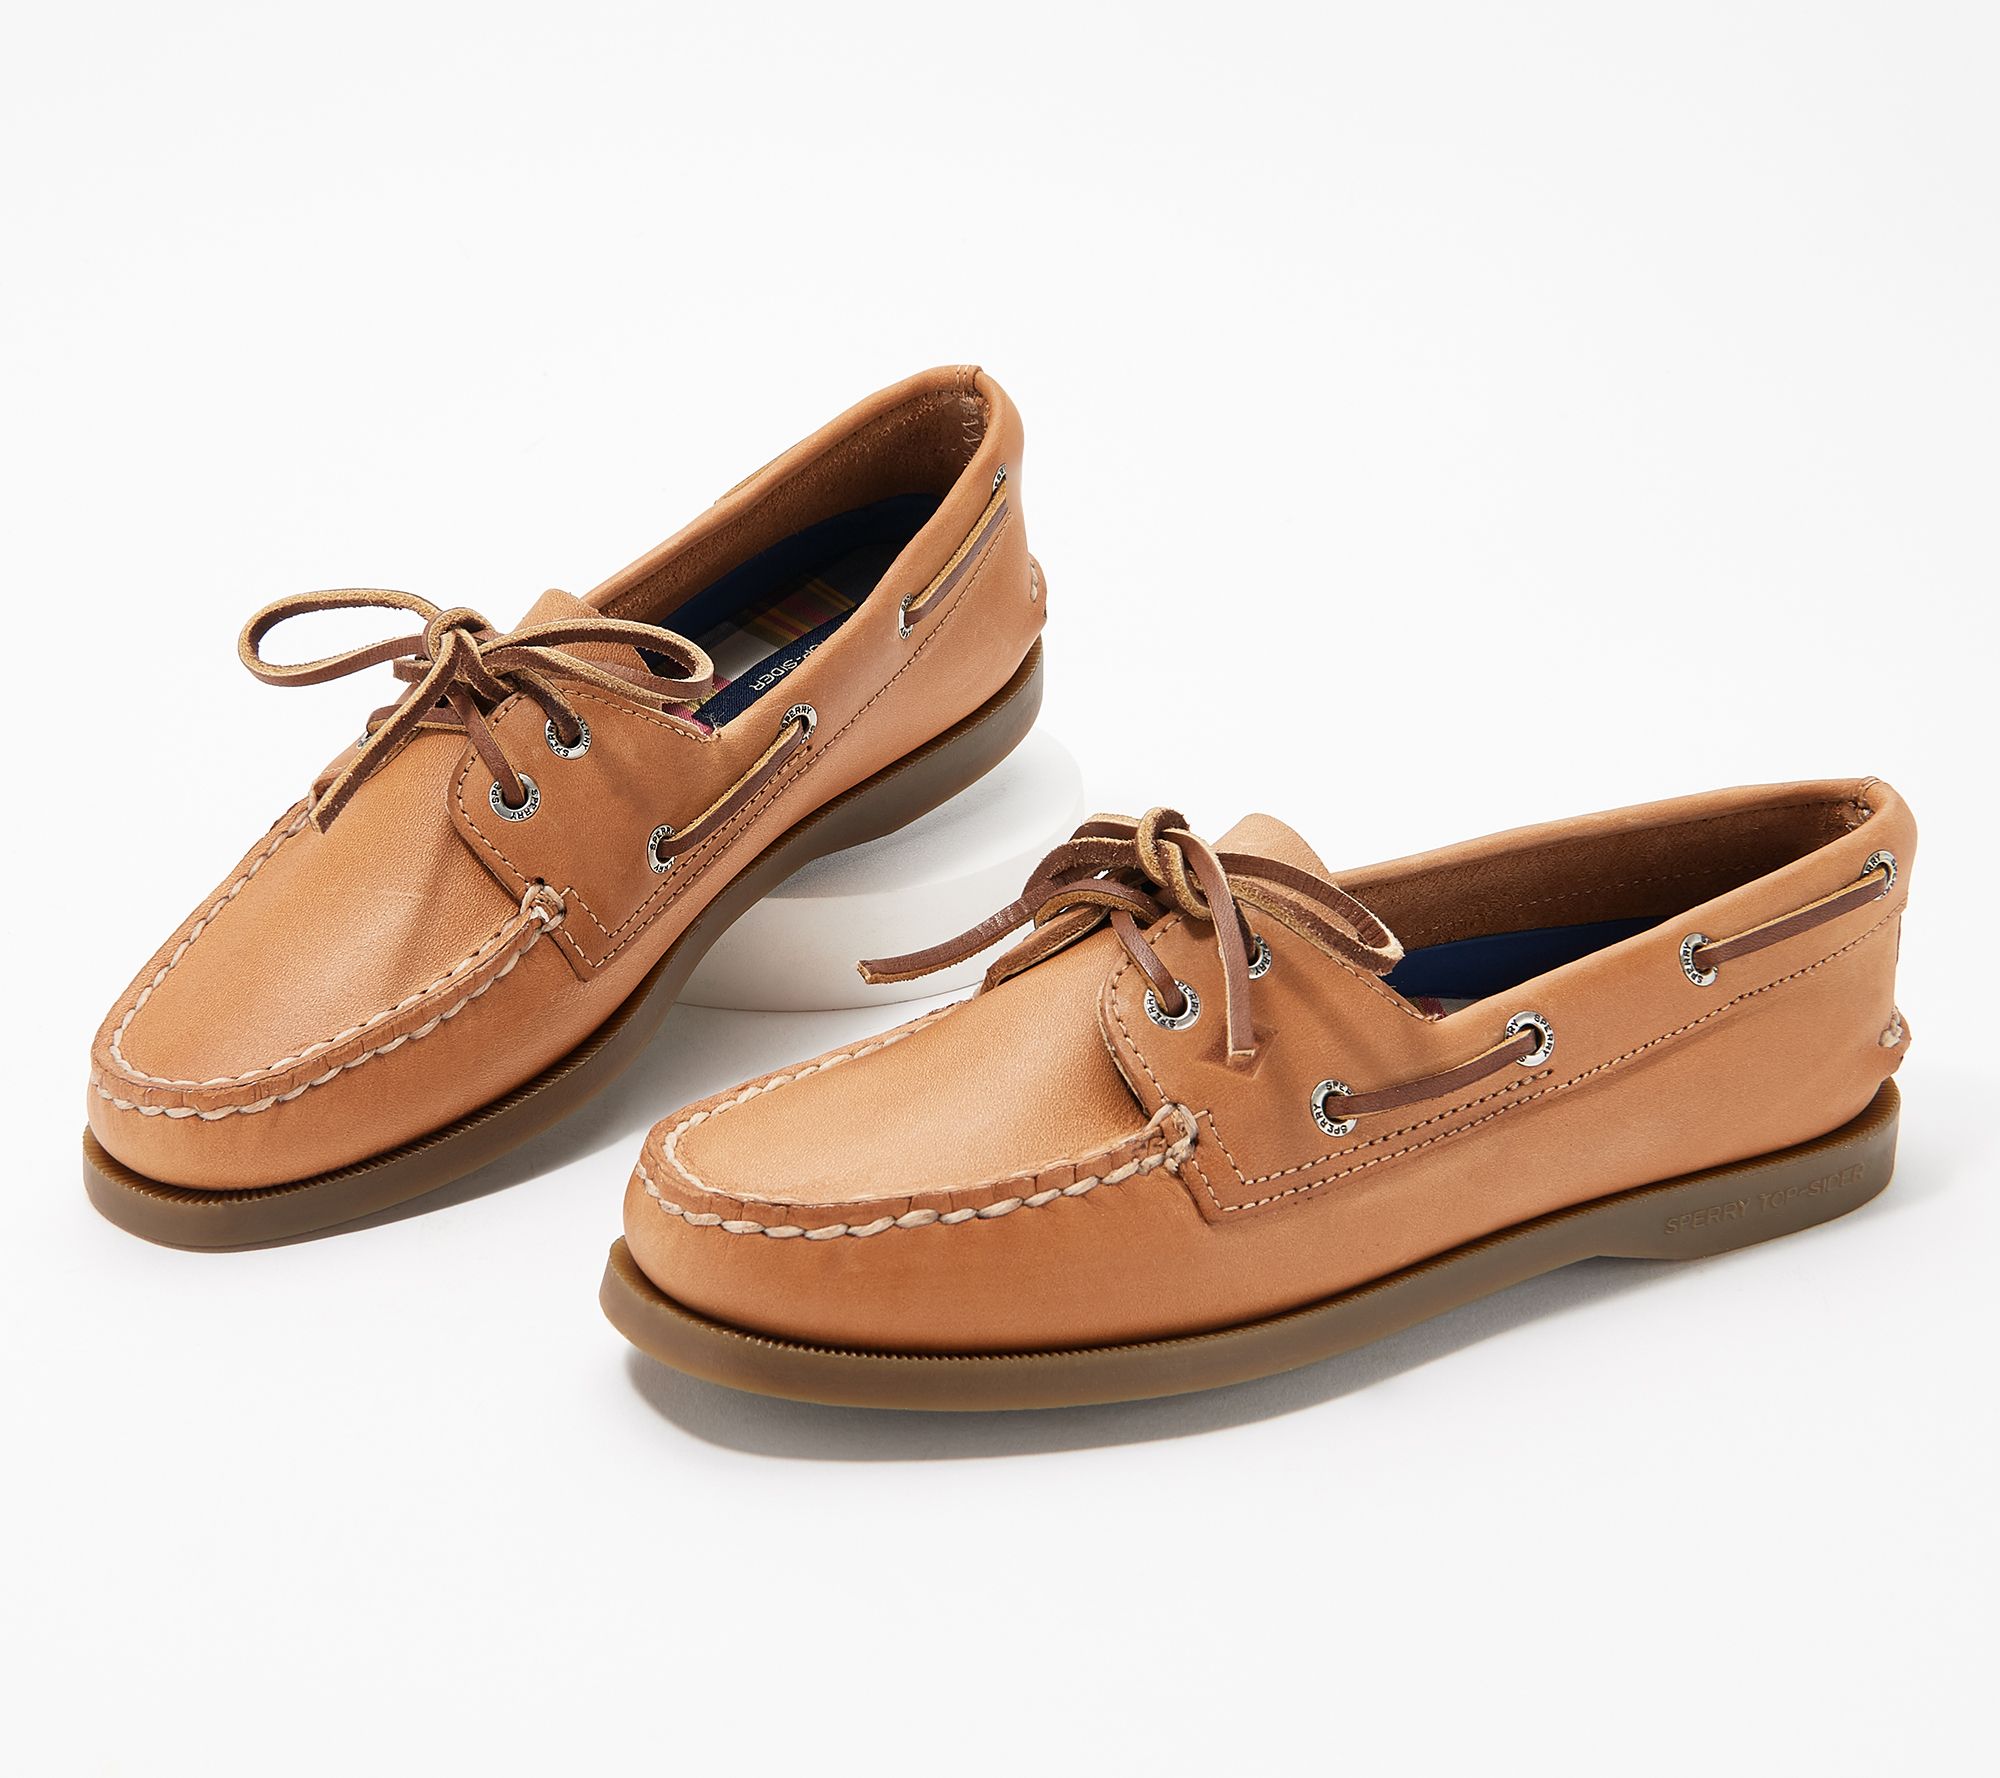 sperry winter boat shoes